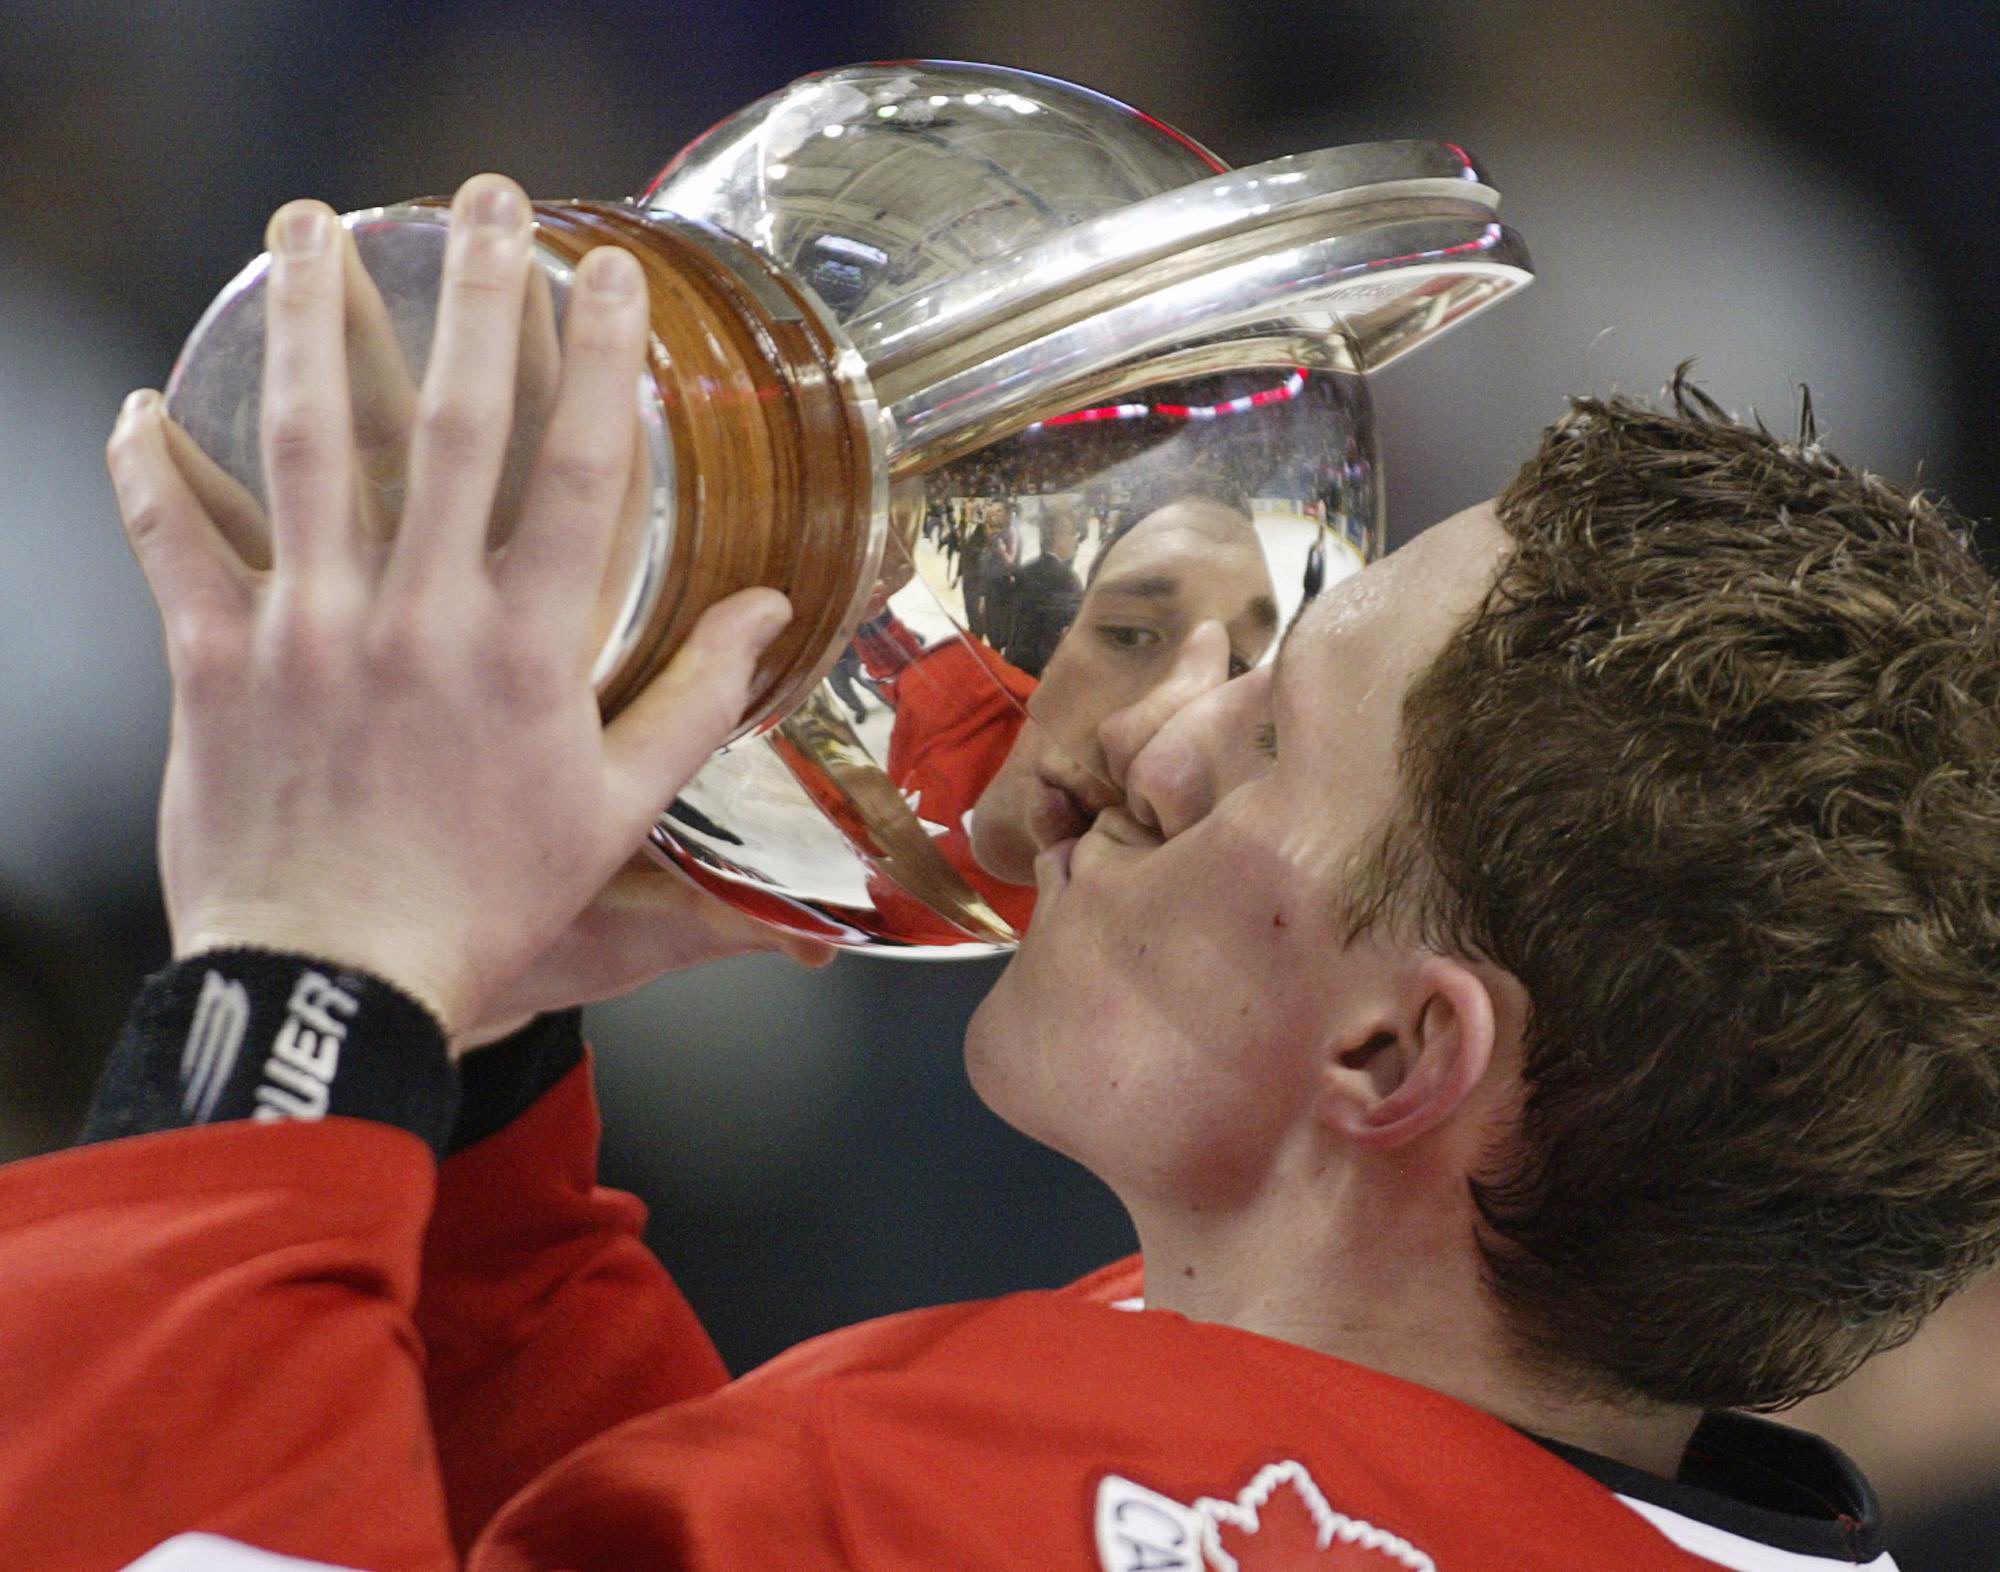 Dion Phaneuf celebrates with the trophy after their gold medal win at the 2005 World Juniors (Photo: CP)